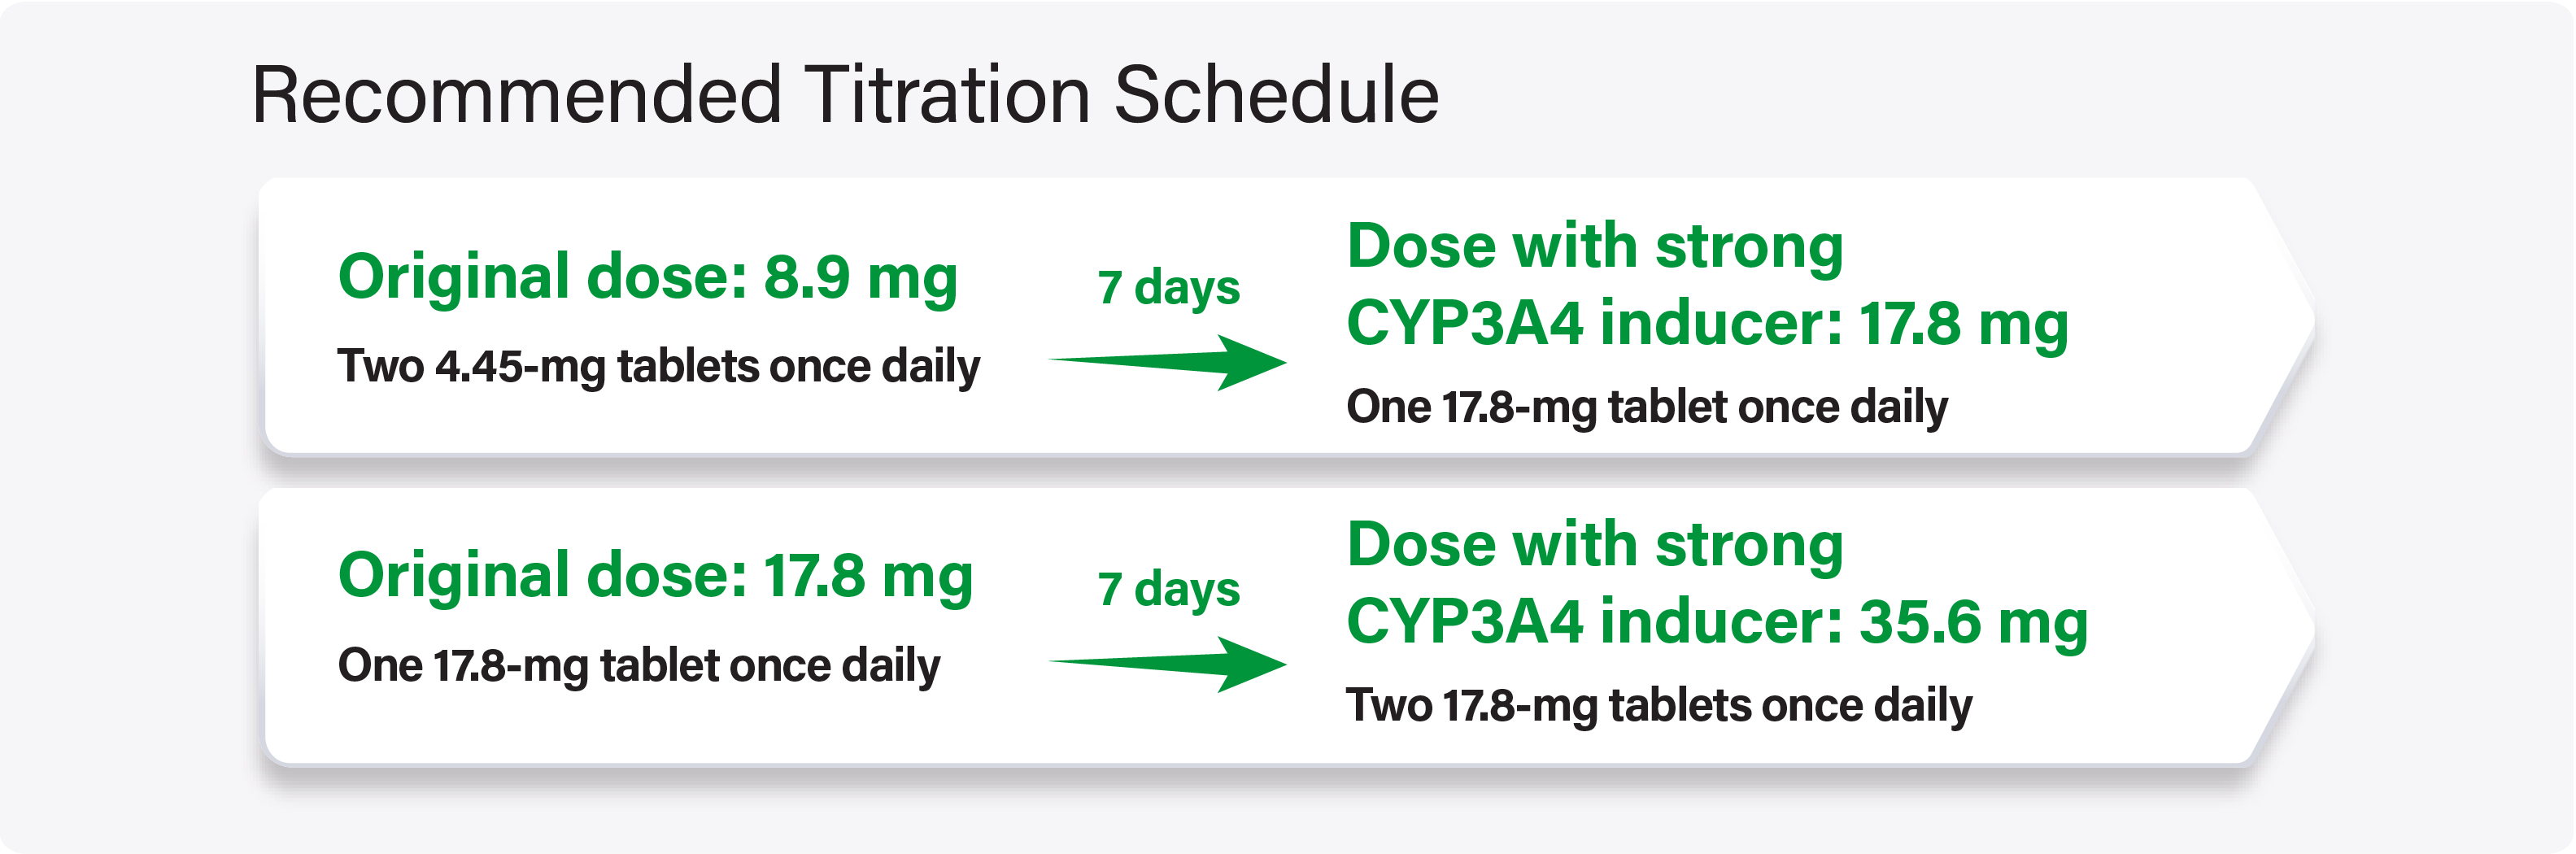 Titration schedule for WAKIX with strong CYP3A4 inducers graphic